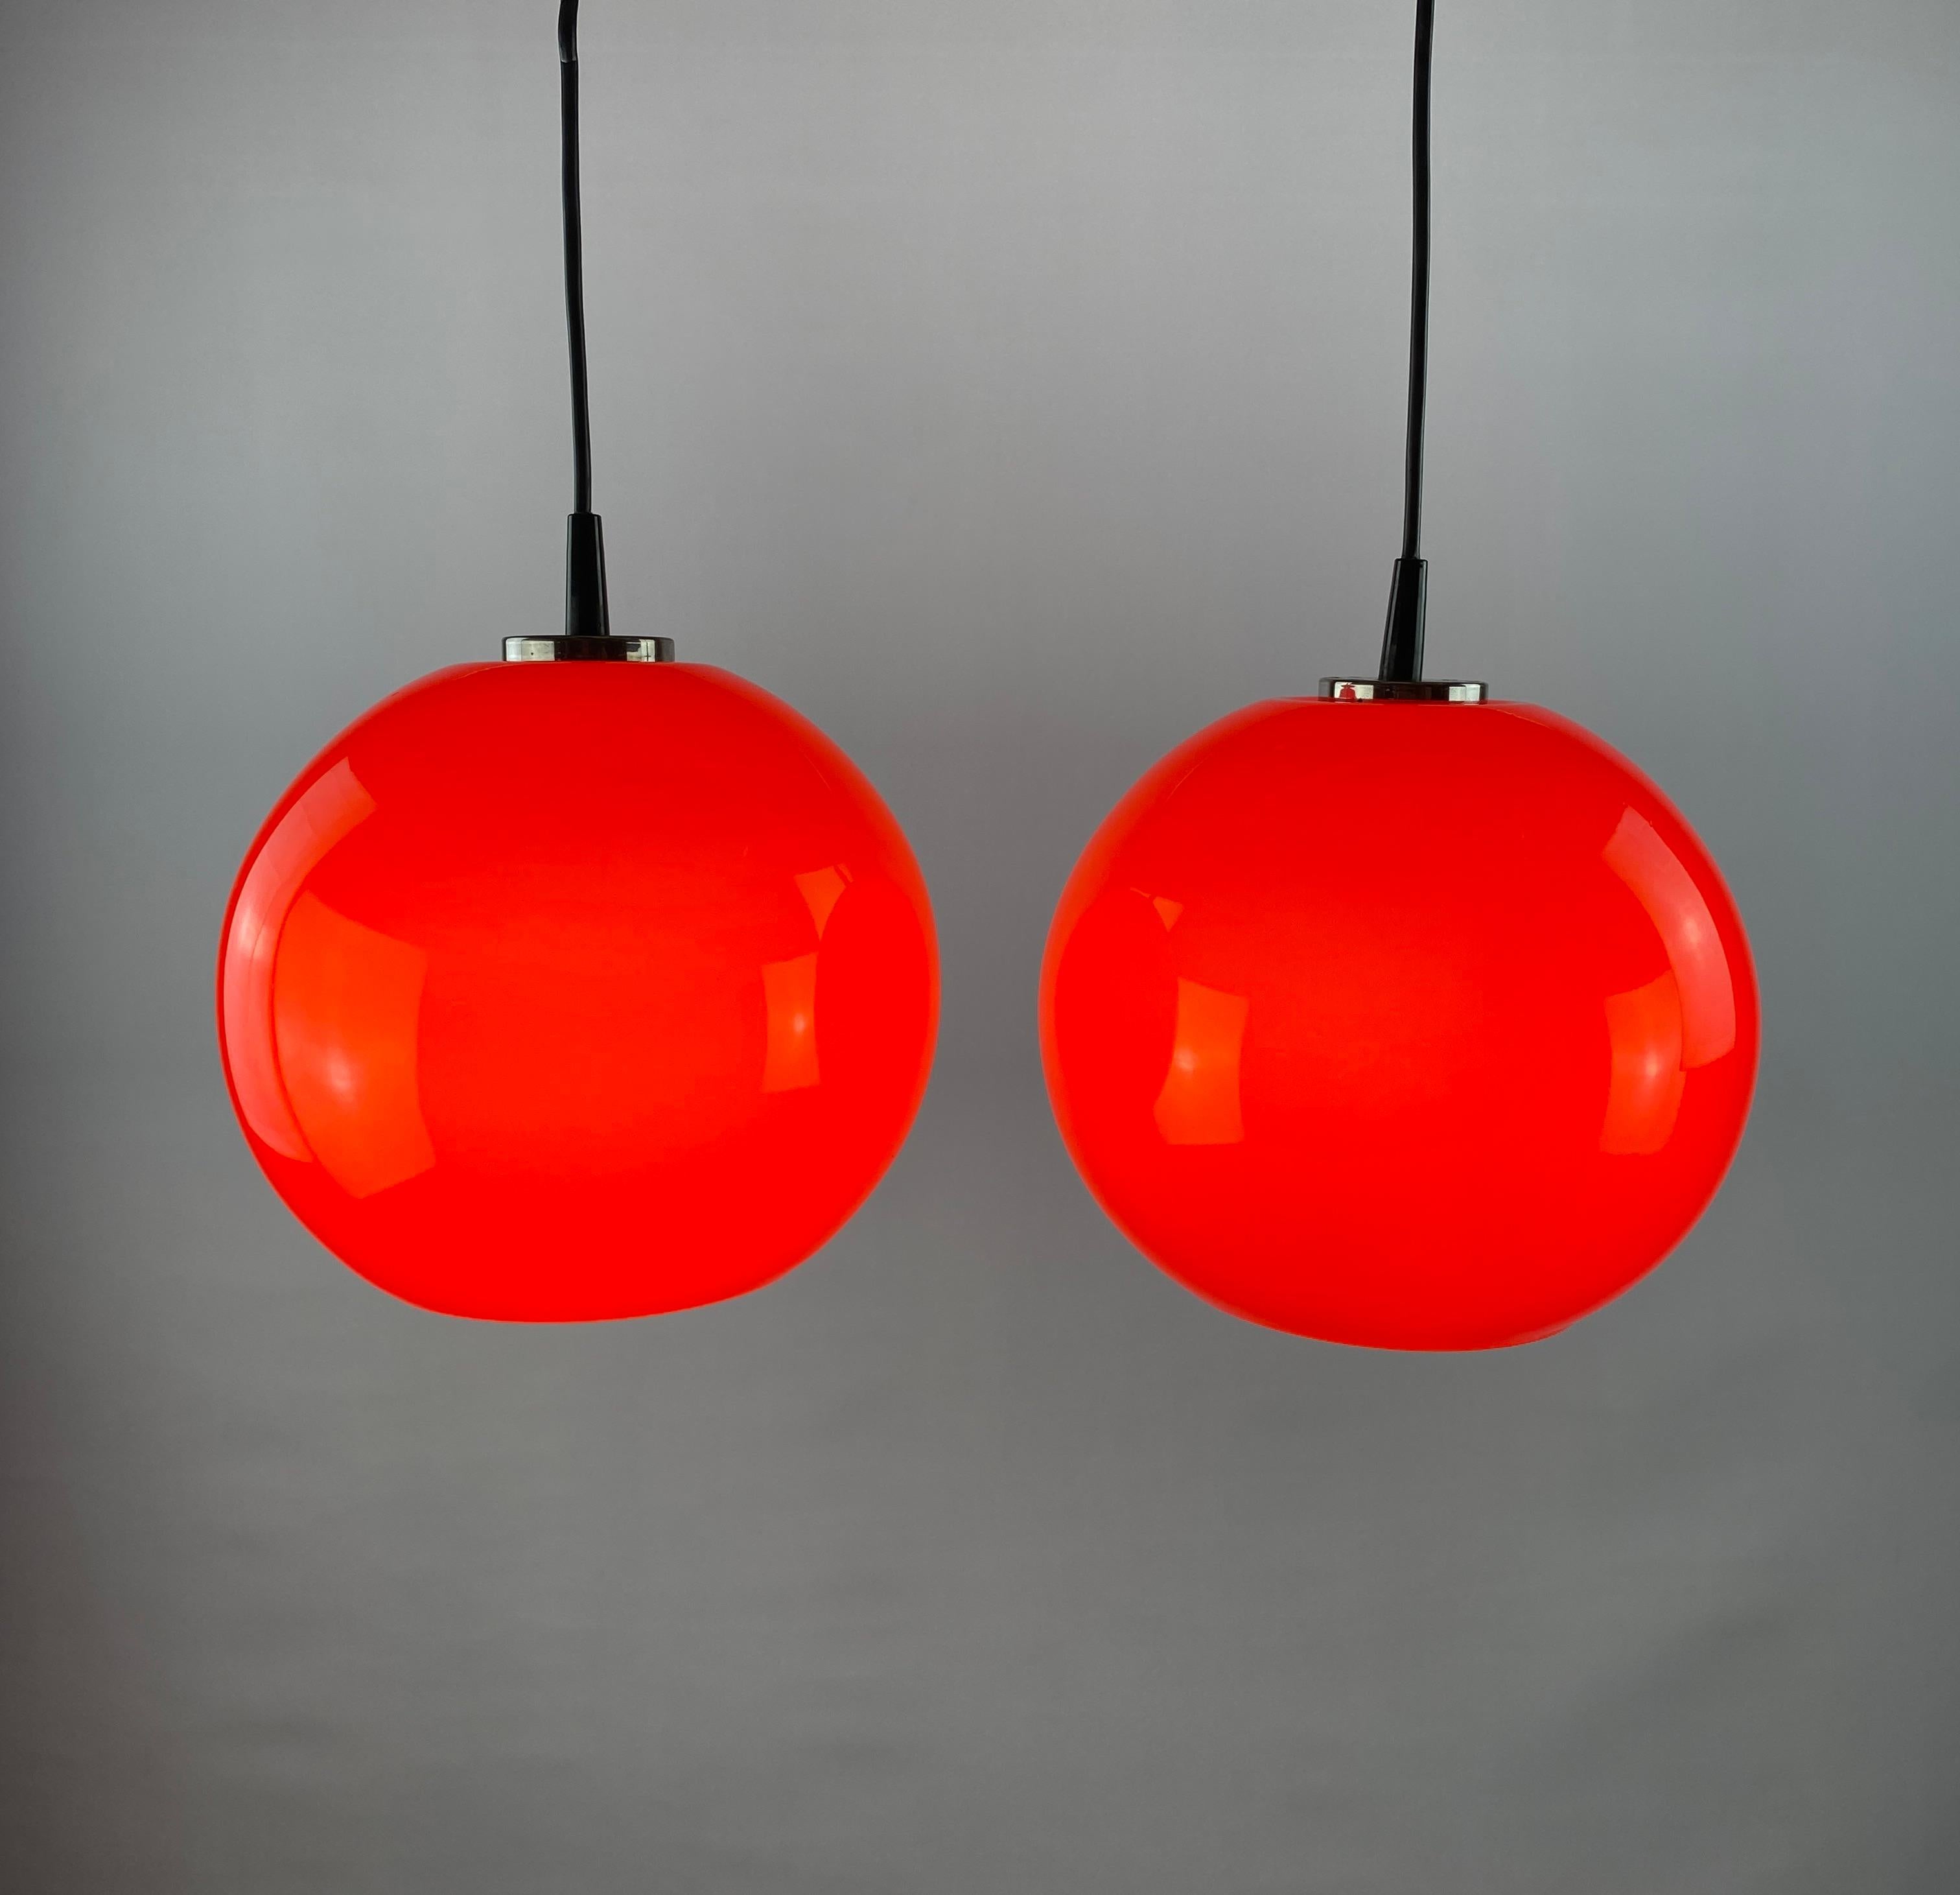 Set of two cherry colored pendant lights by Peill and Putzler from the 1970's. Provides a beautiful cherry-like light through the glass.

DIMENSIONS
Height: 22cm
Diameter: 23cm
Cord length: 20cm (can be made longer if desired)

PRODUCT